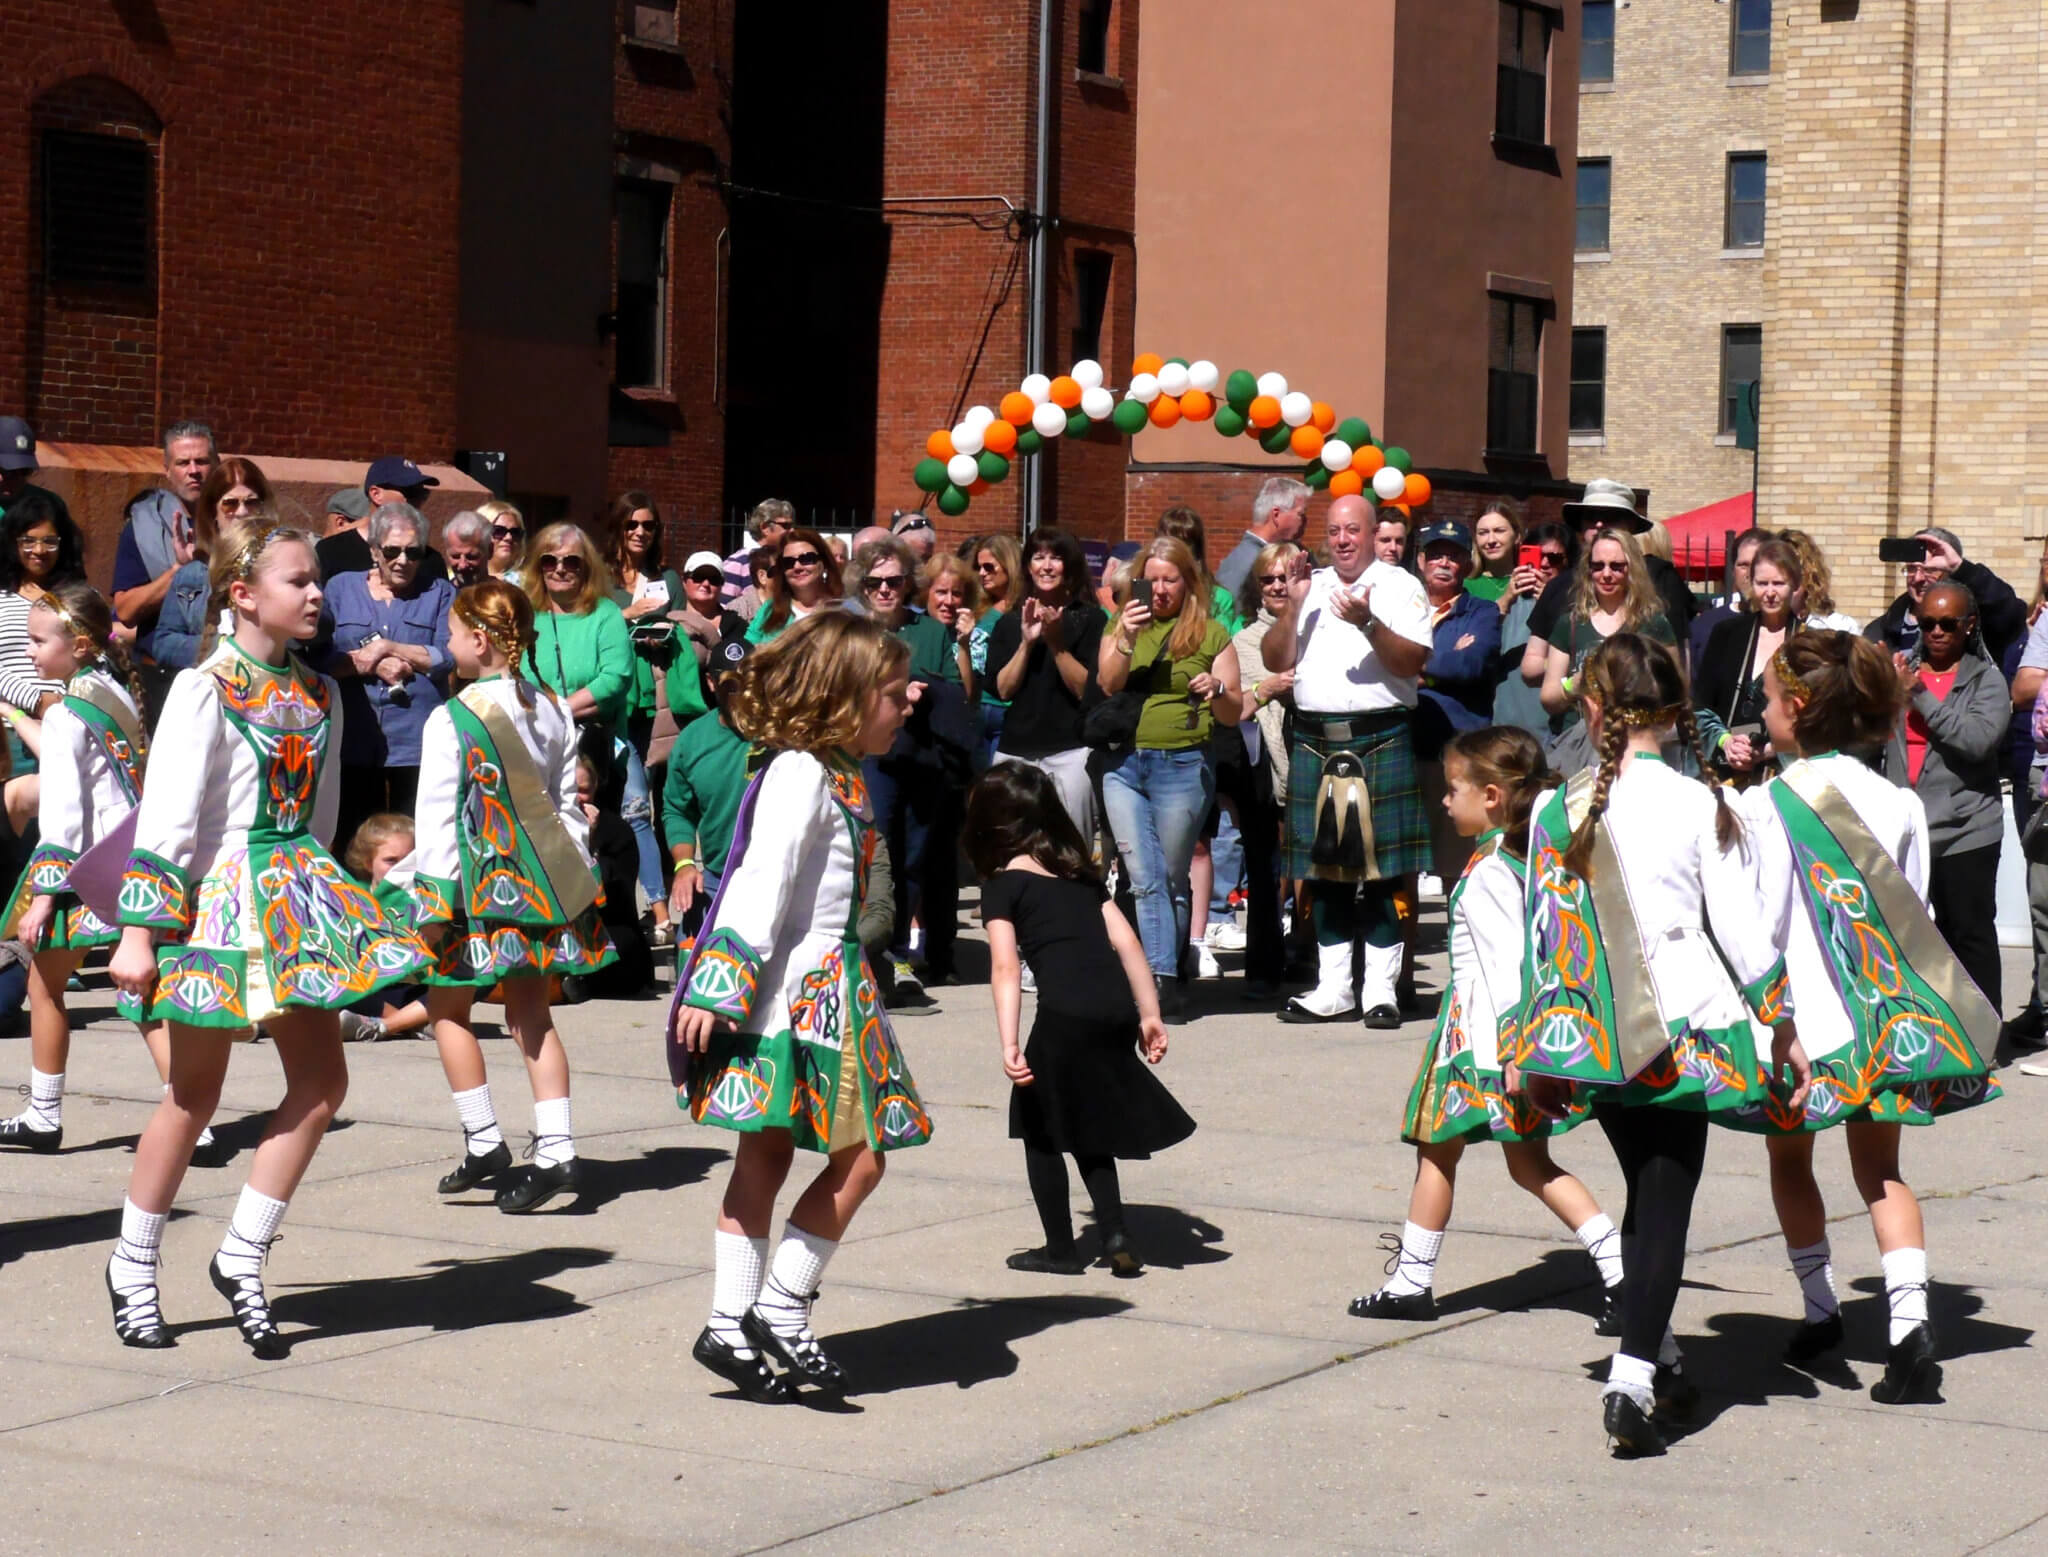 Great Irish Fair gets back to its roots at 41st annual celebration in